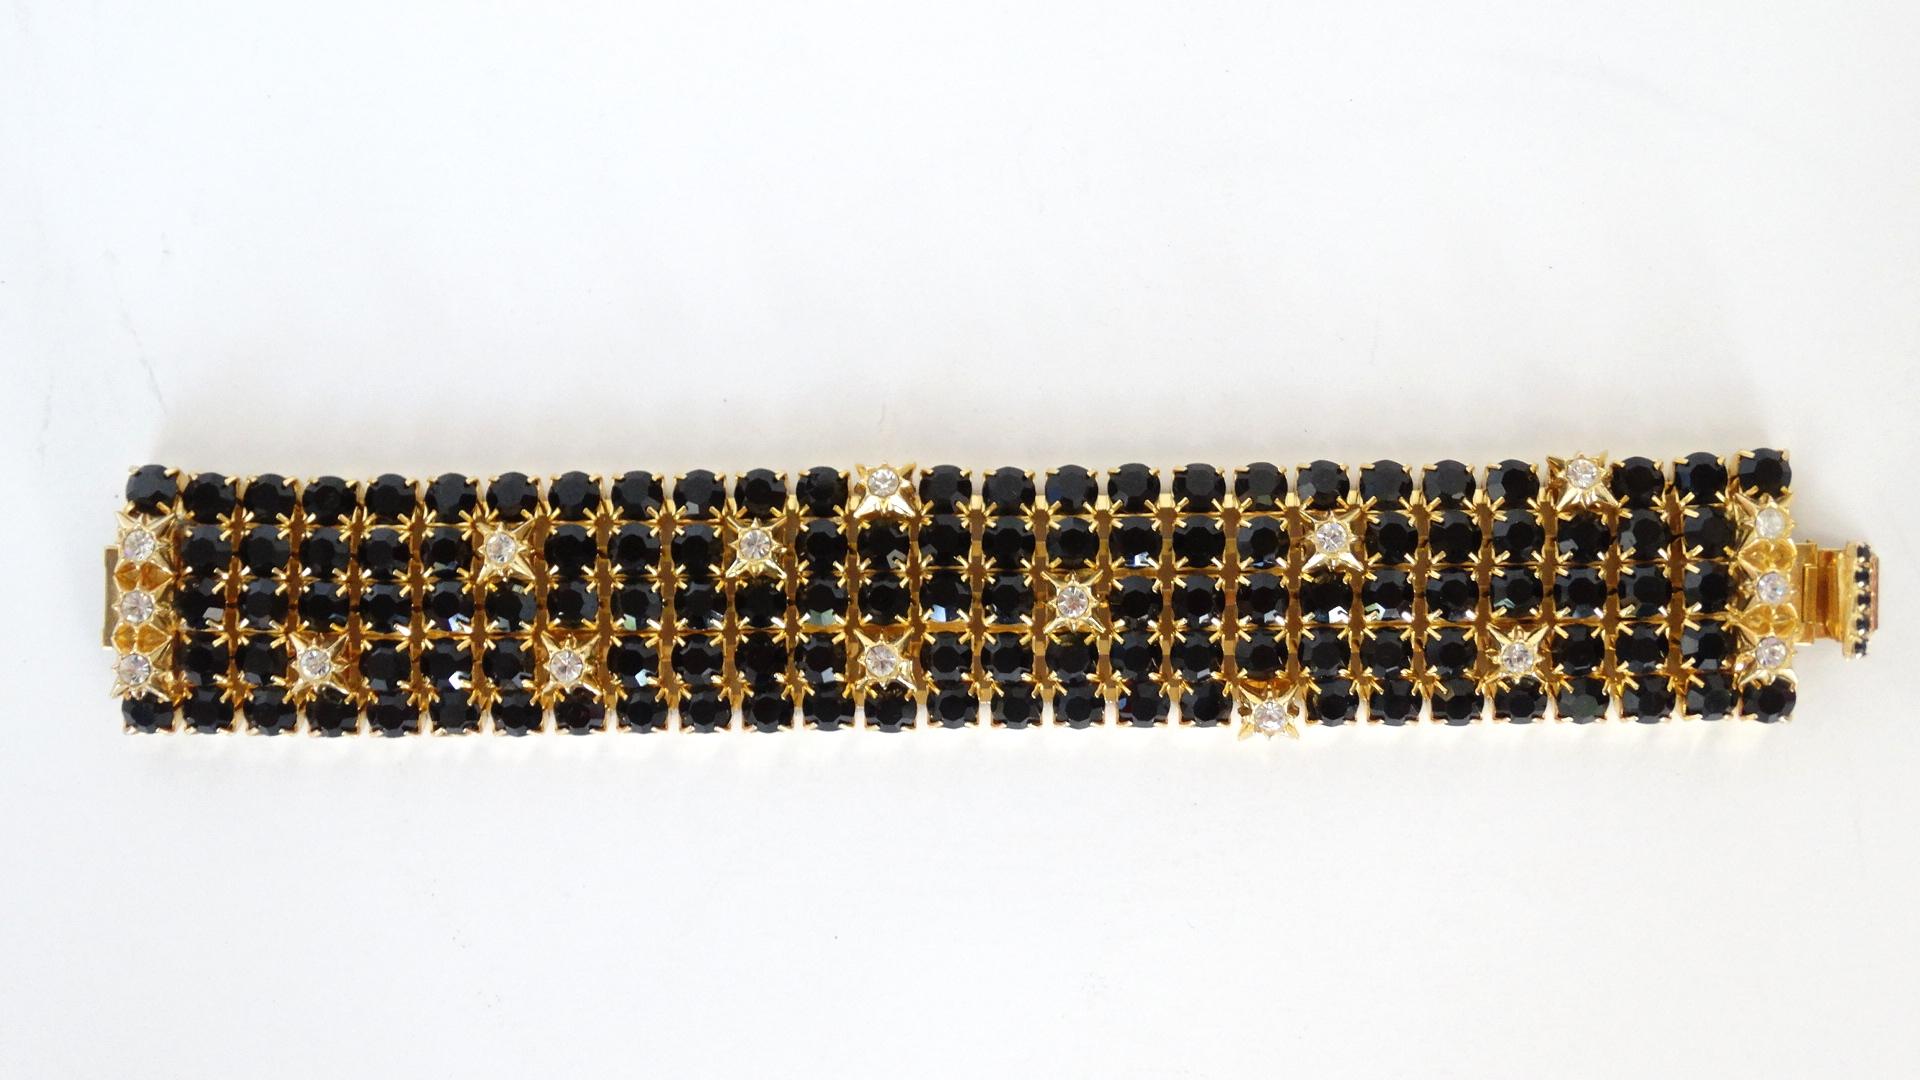 A beautiful 5 row black rhinestone bracelet created by William de Lillo in the late 70's. This bracelet features clear starburst rhinestones thru out. 8 inches in length 